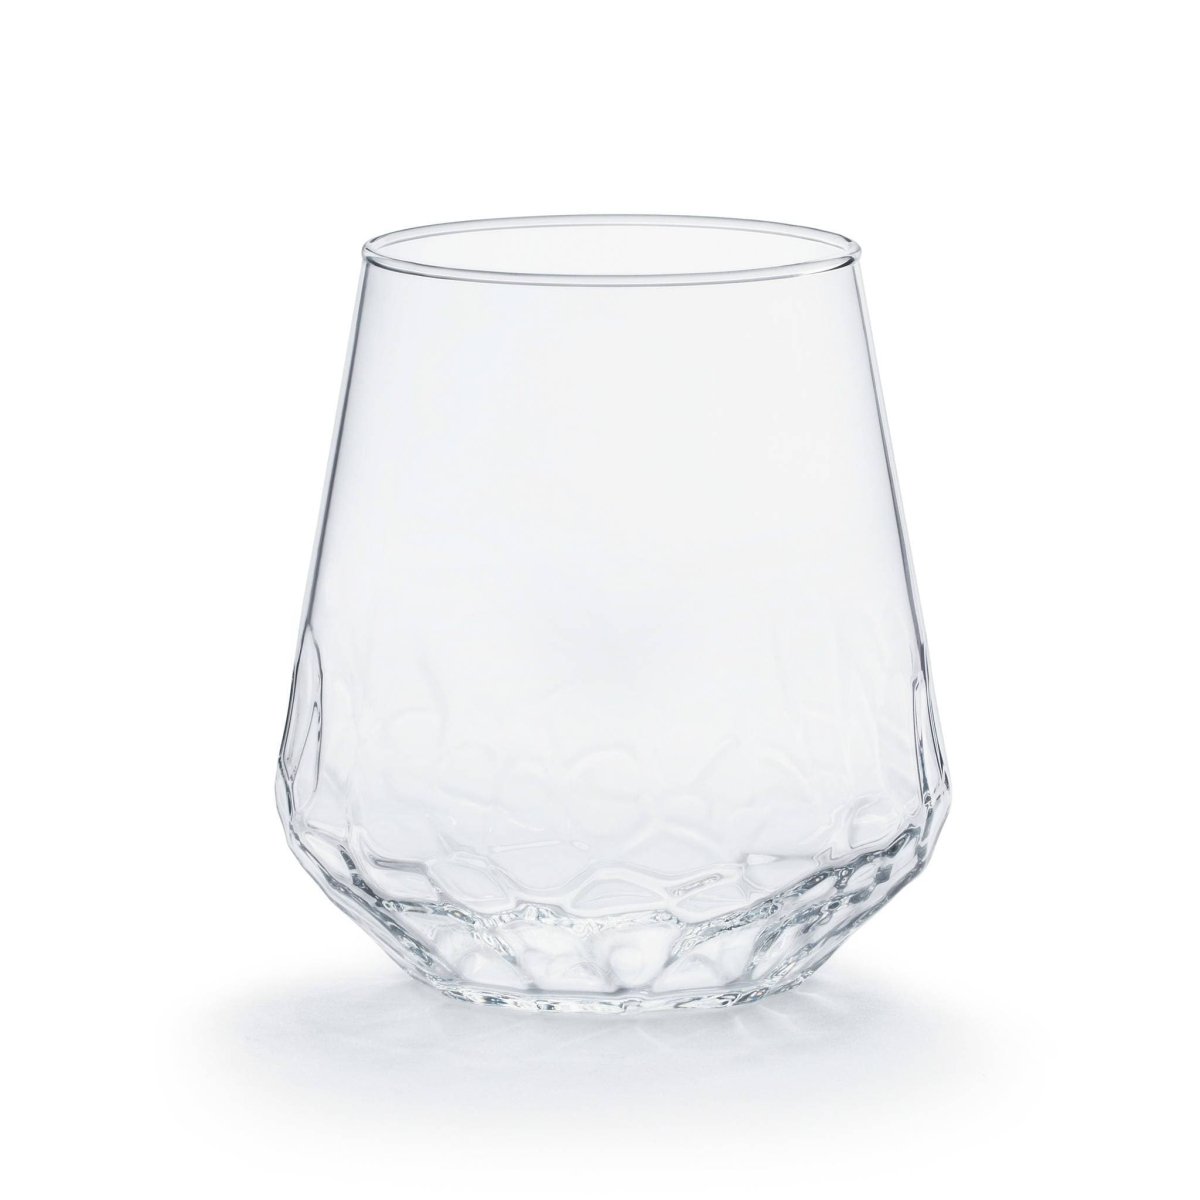 Clear Glass Libbey Set 5 Stemless Wine Glasses 15oz Wide Mouth Merlot Glass  NWOB